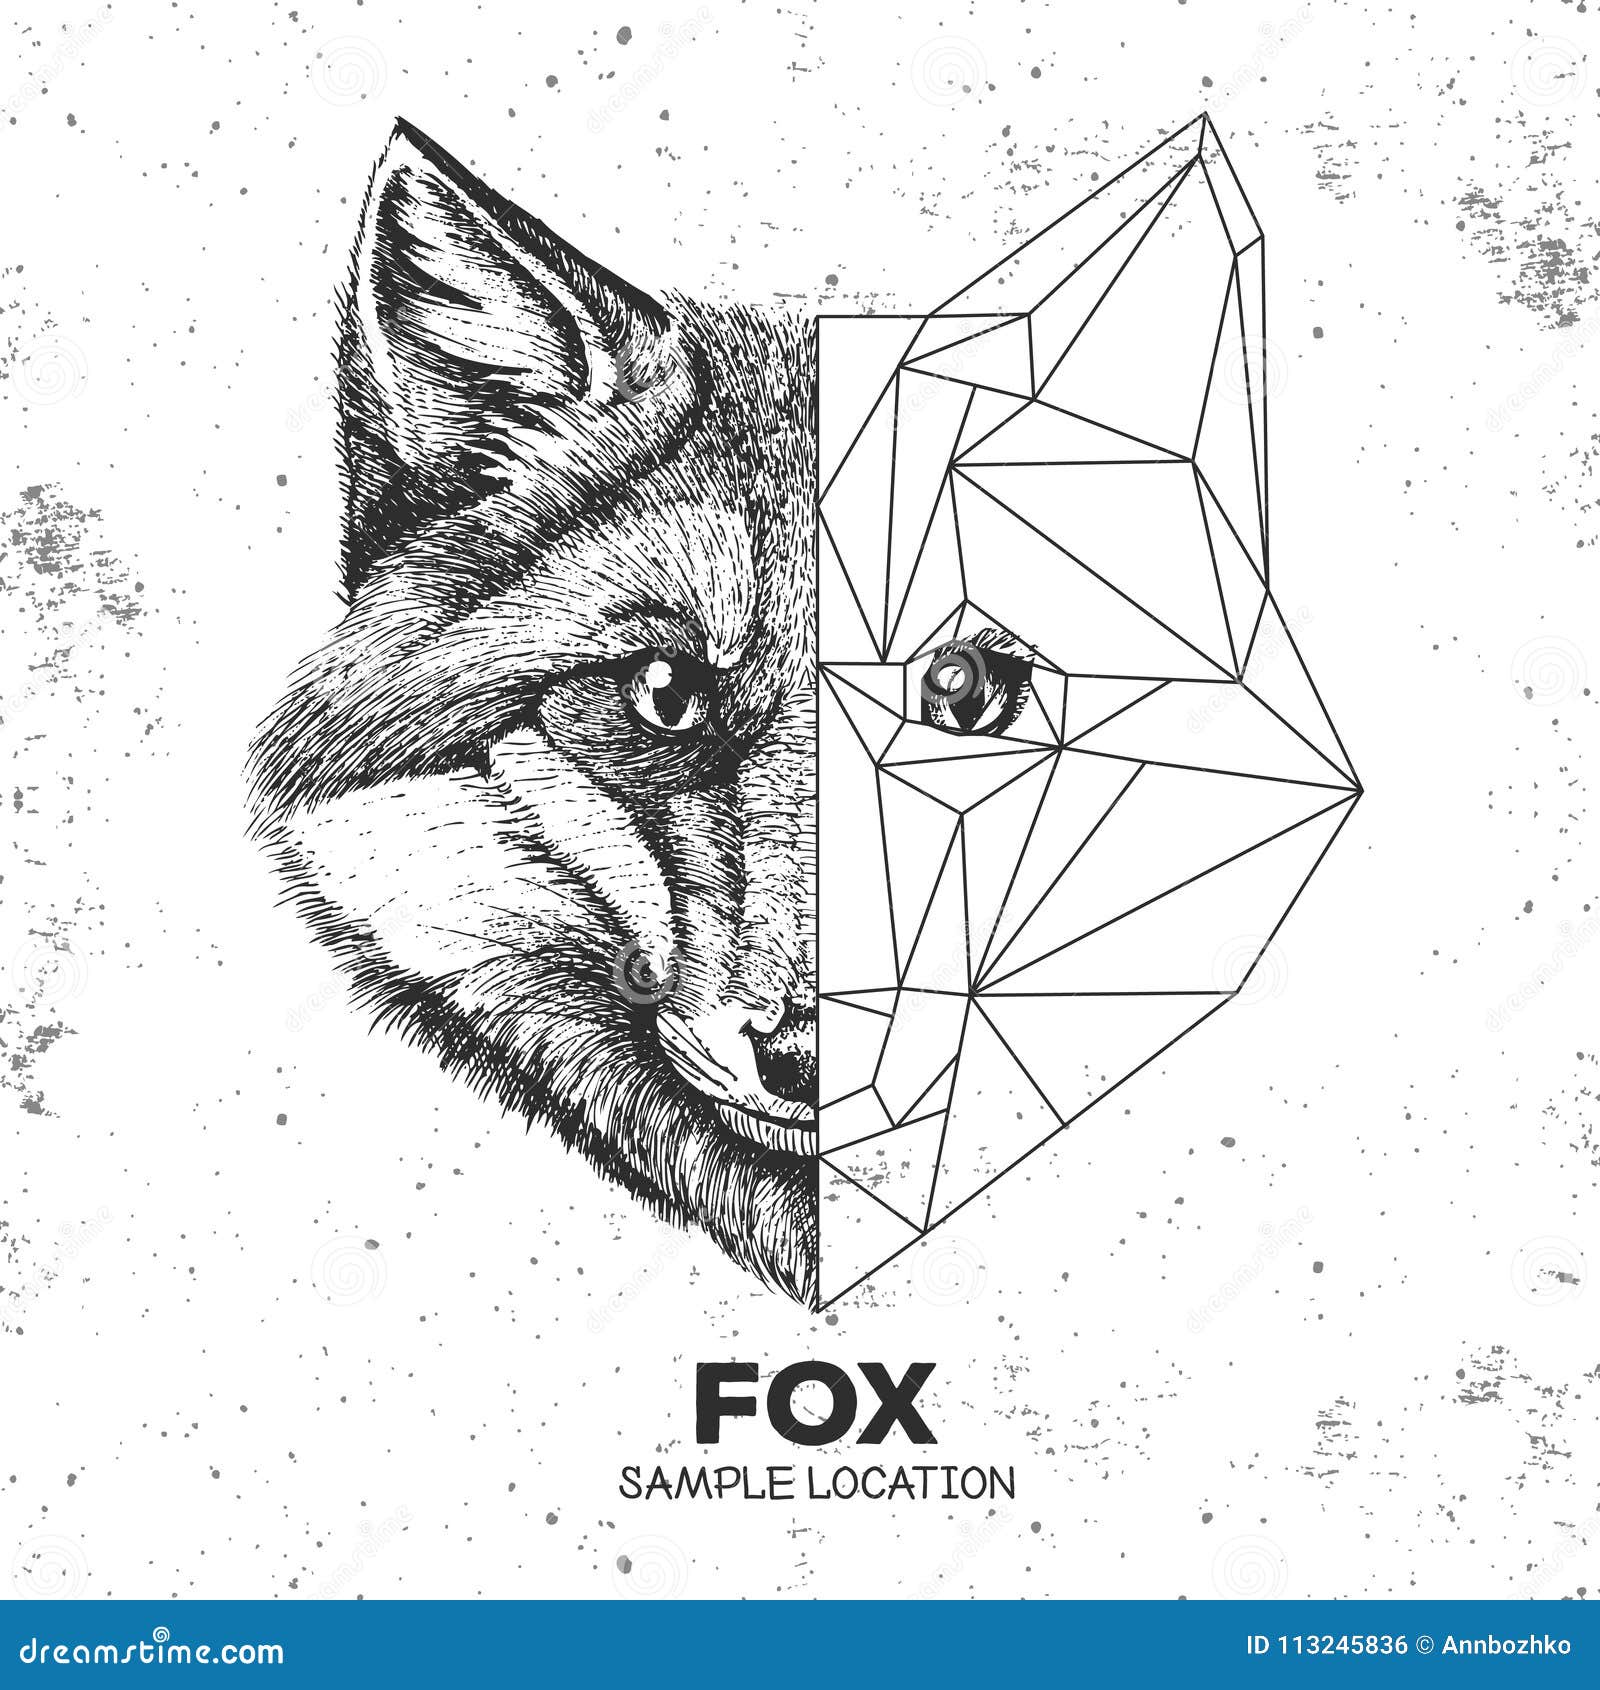 Hipster Animal Realistic And Polygonal Fox Face Stock Vector Illustration Of Network Graphic